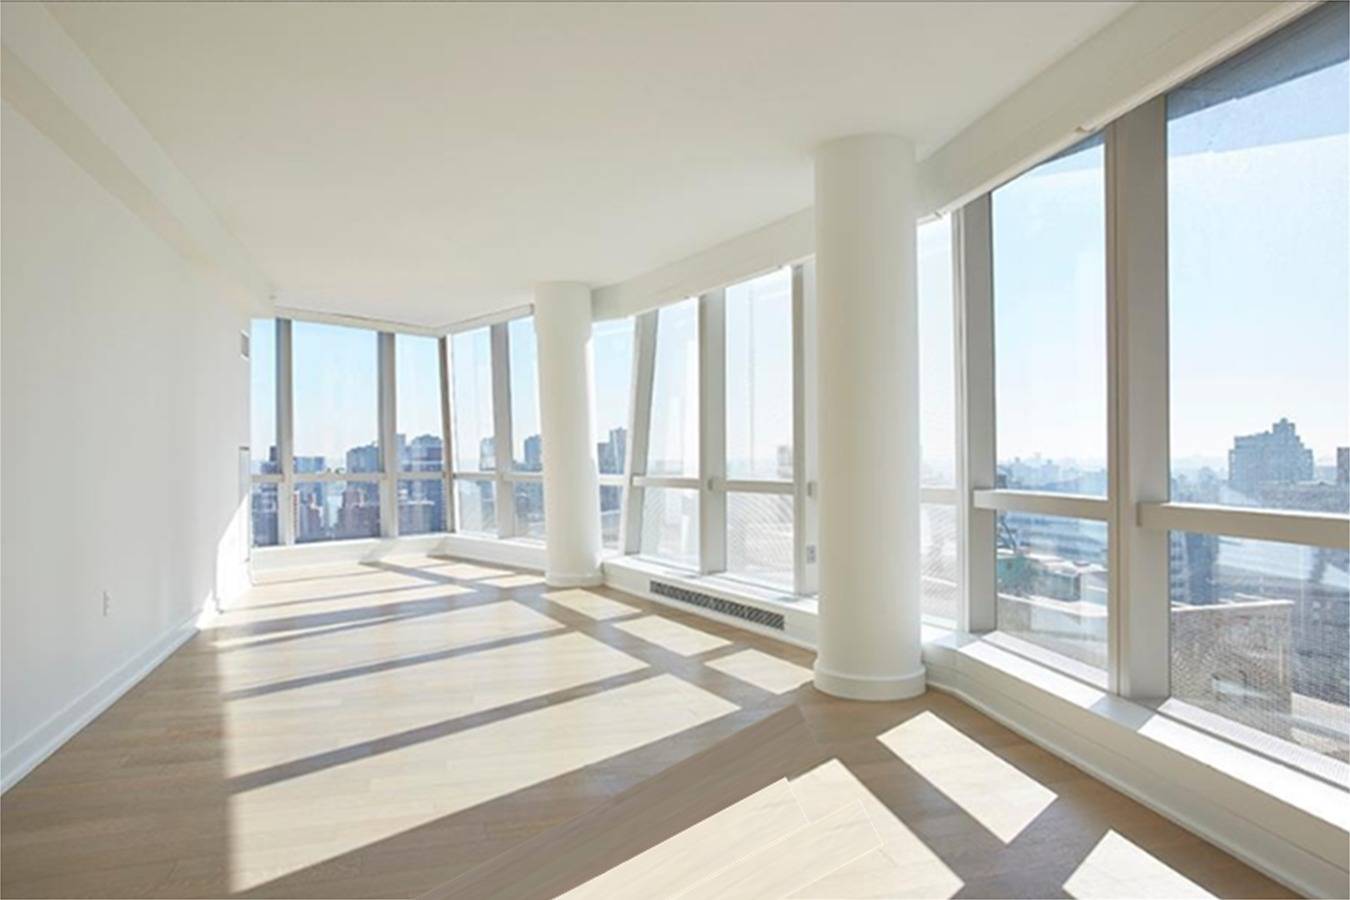 400 Park Avenue South 25B Offering 2 months free on a 14 month lease for immediate move in.